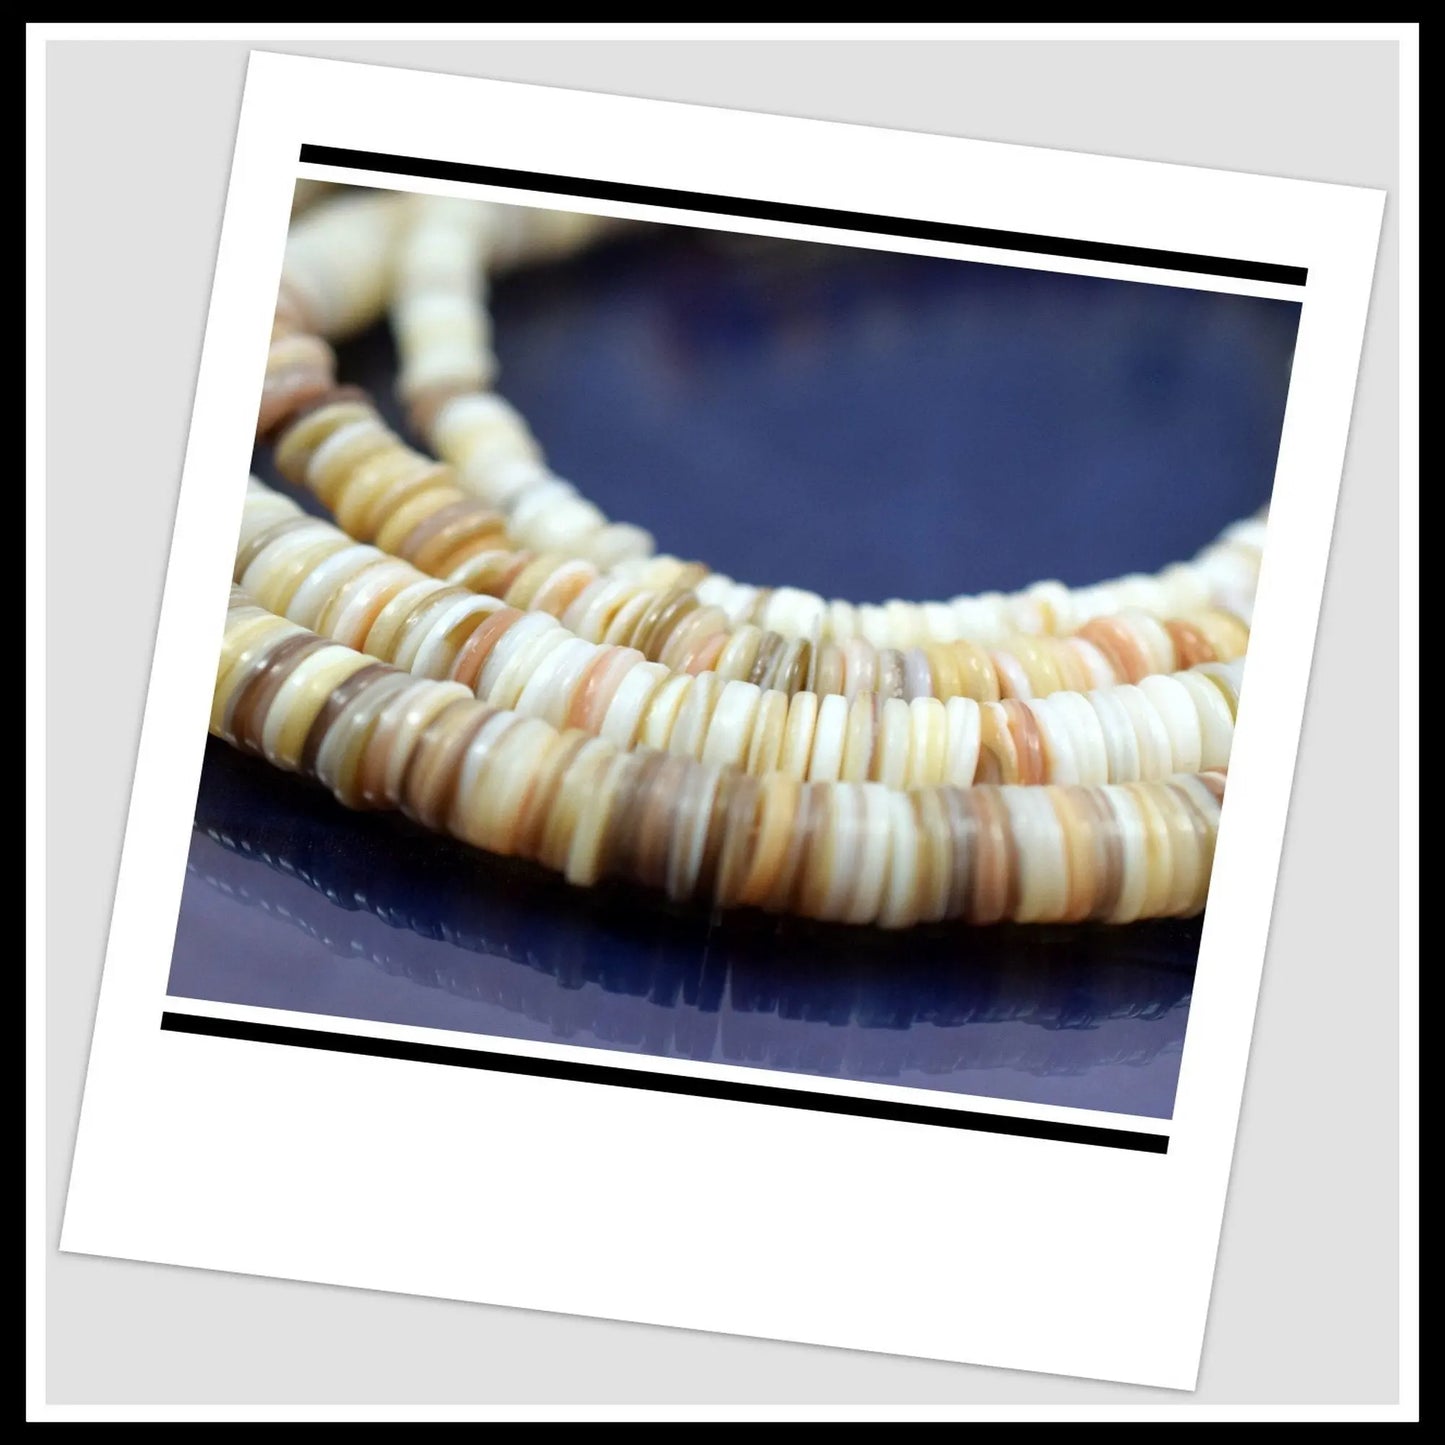 Ocean Sea Shell Roundel Heishi Beads Natural Stones Jewelry Creamy from 248 PCs - BeadsFindingDepot